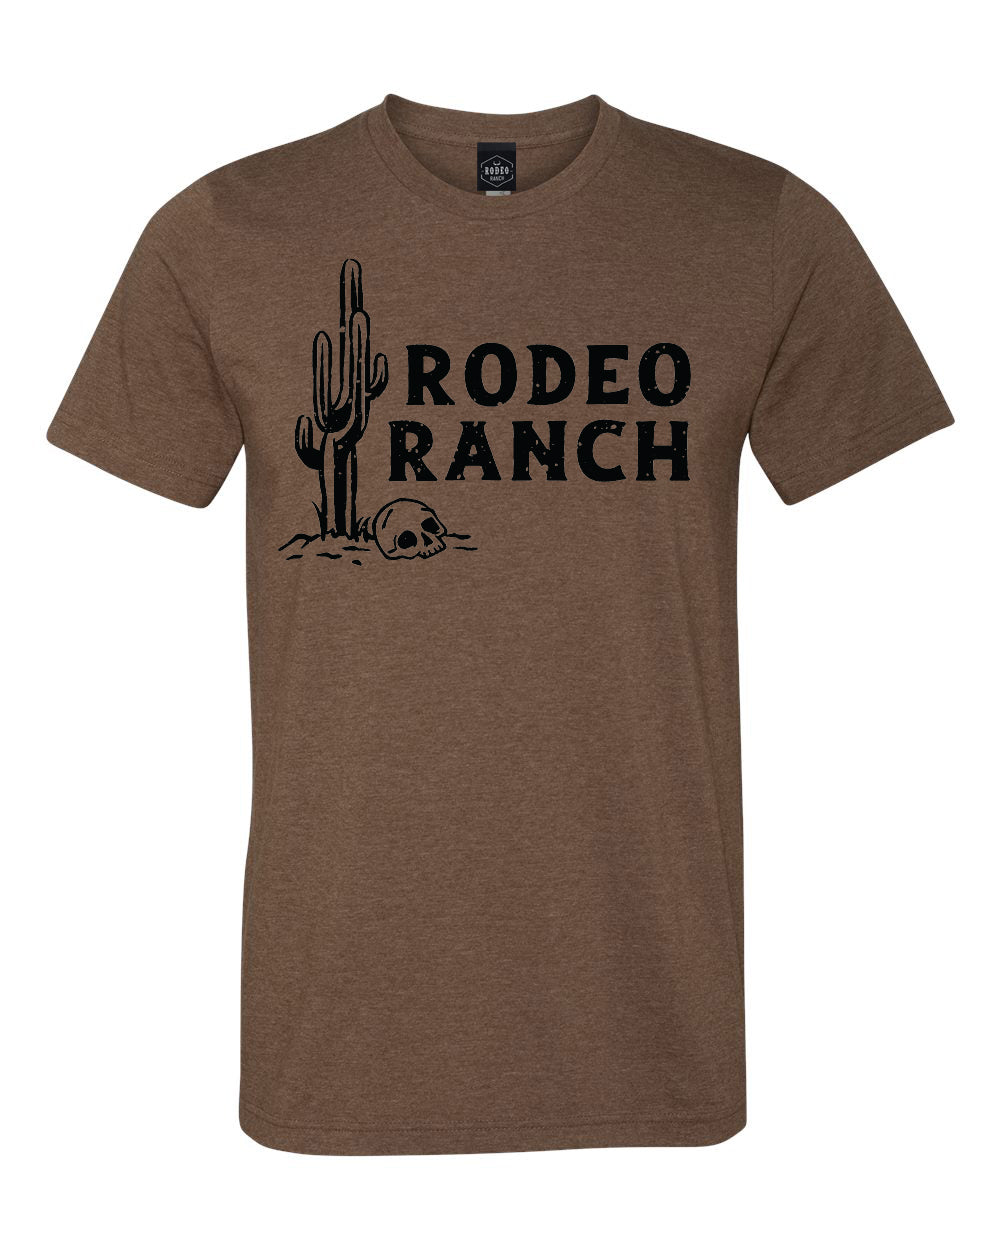 Rodeo Ranch Cactus Short Sleeve Shirt - Heather Brown